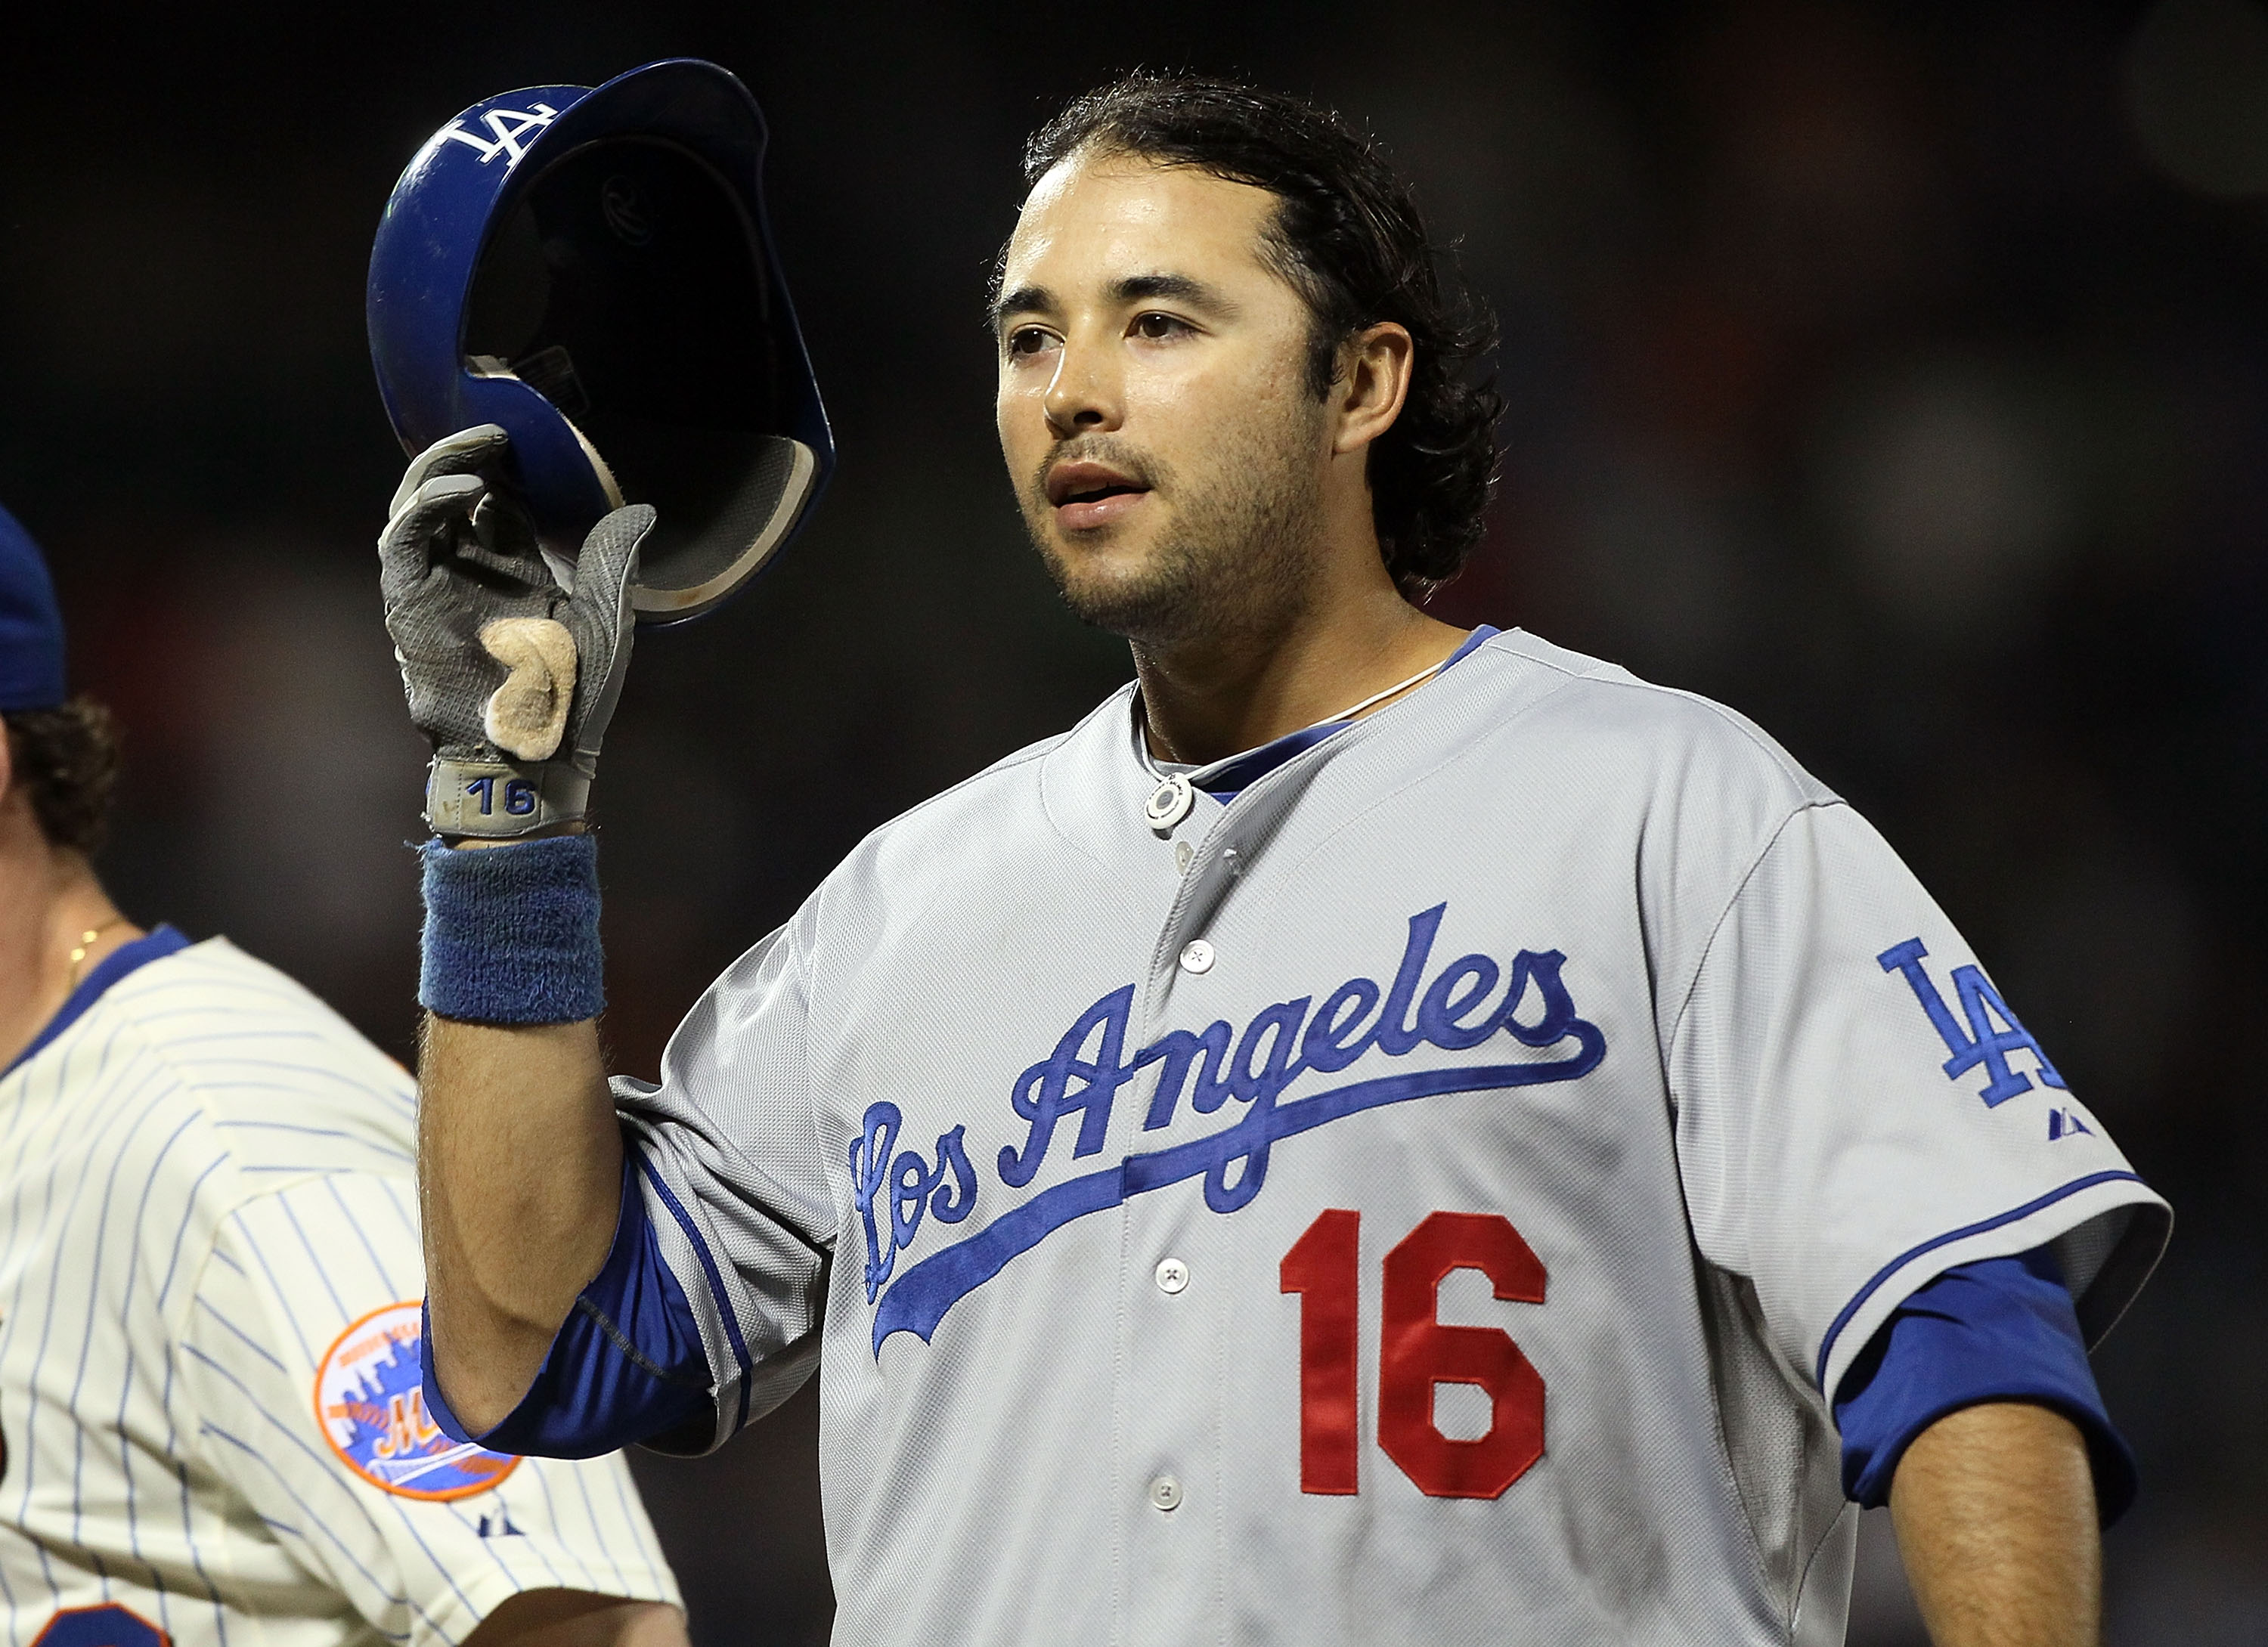 His hit streak may be over, but Andre Ethier is still a great player.